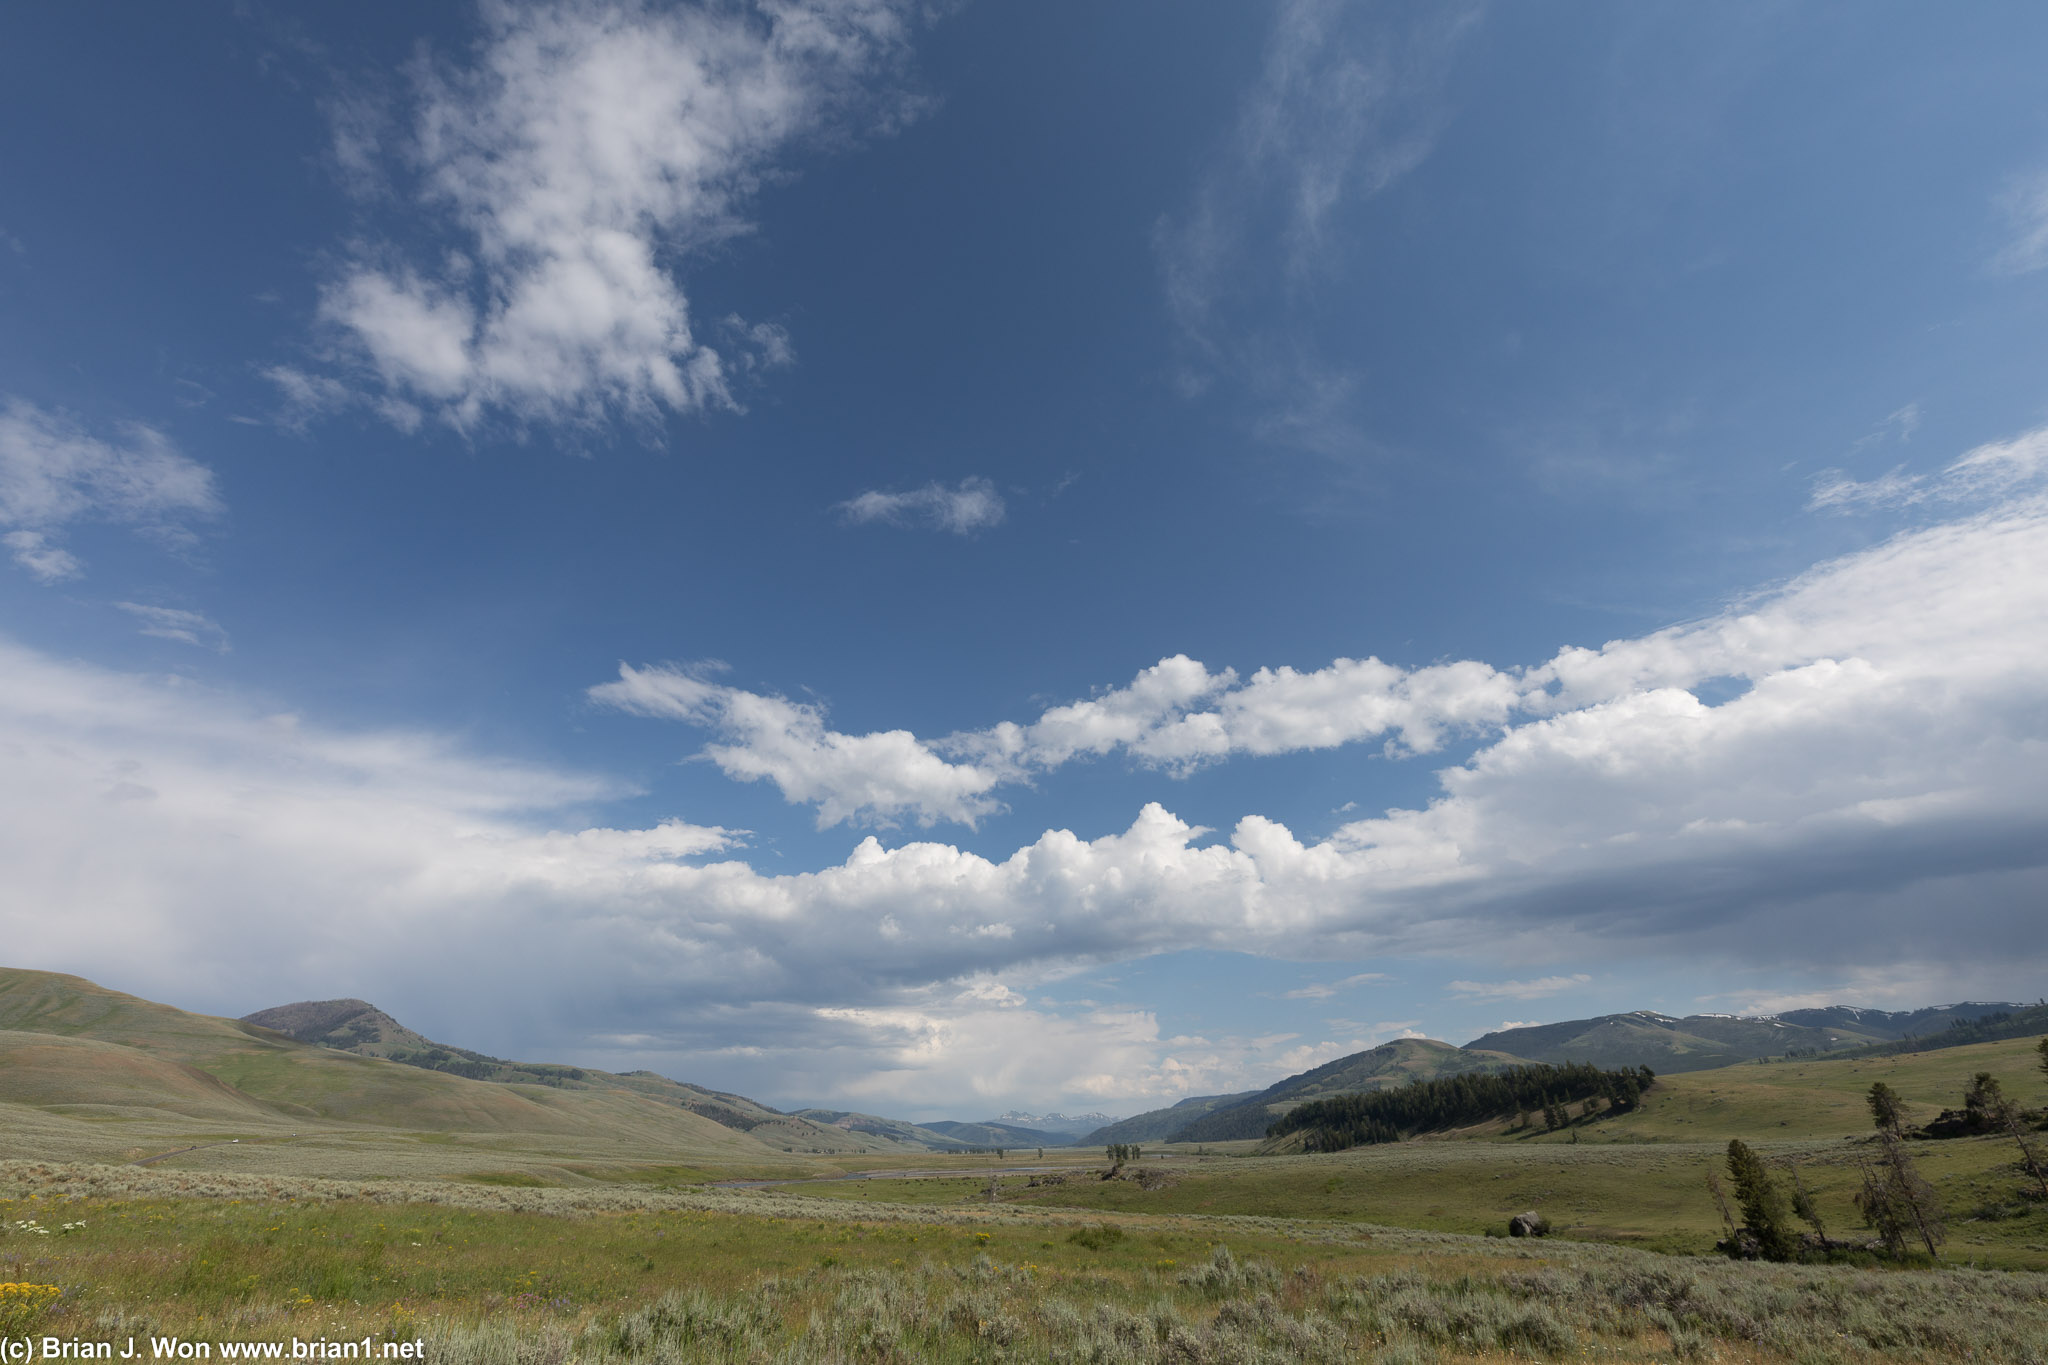 Lamar Valley. After so many other spectacular views, Yellowstone still maanges to impress.